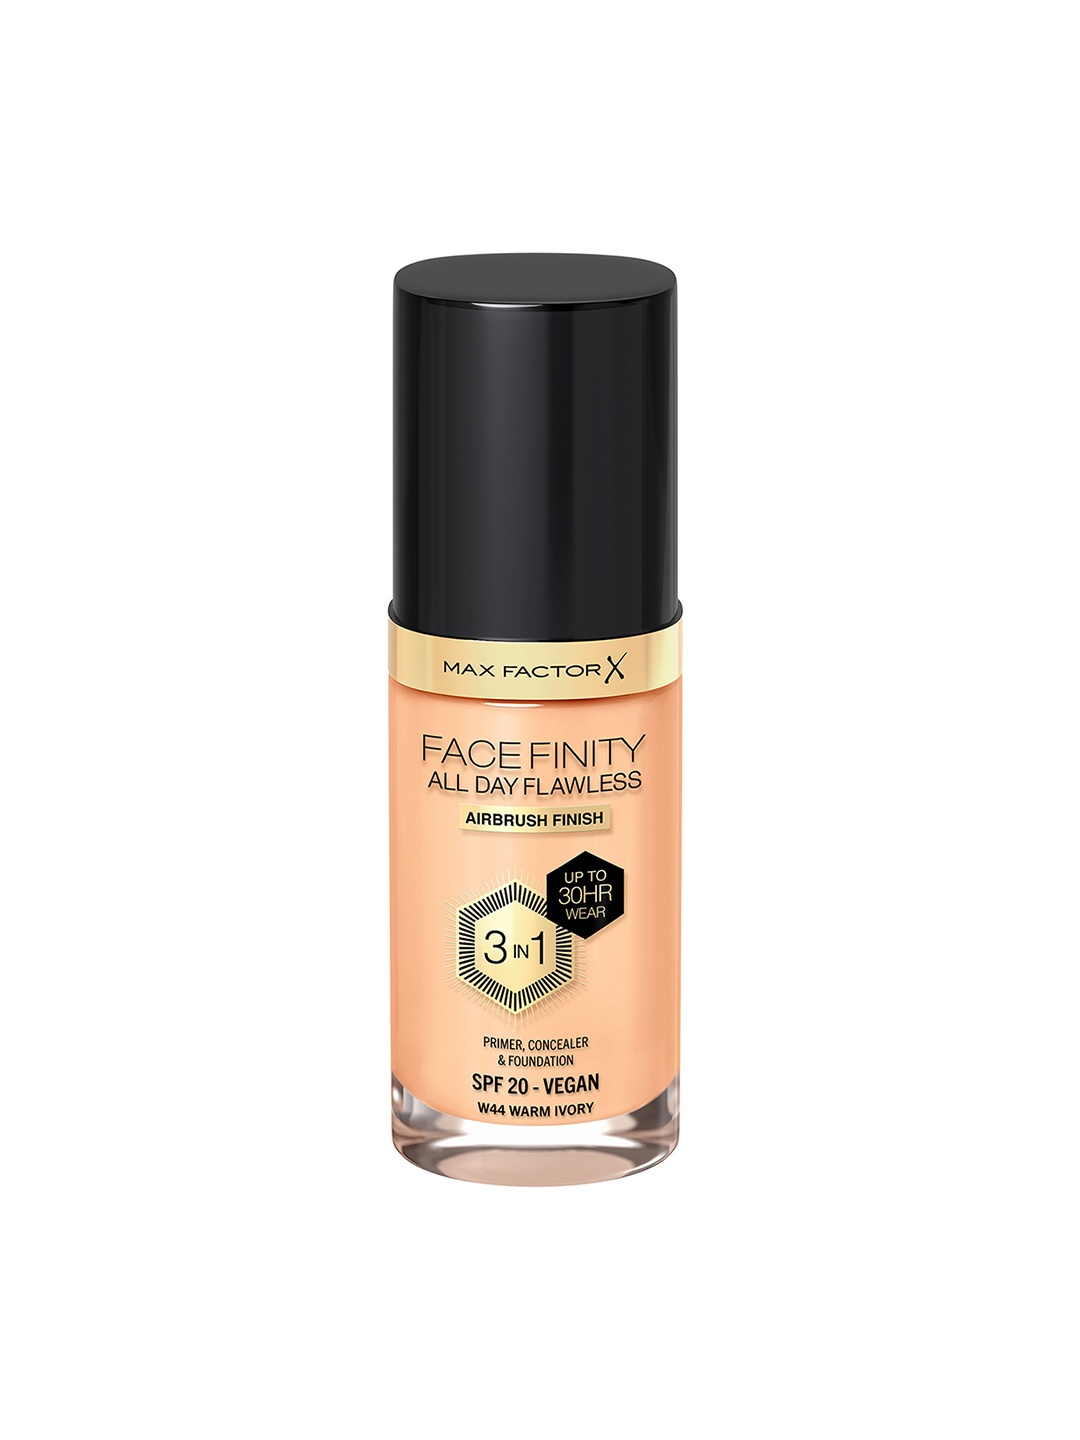 

Max Factor Facefinity SPF20 All Day Flawless 3-In-1 Foundation 30ml - Warm Ivory W44, Beige